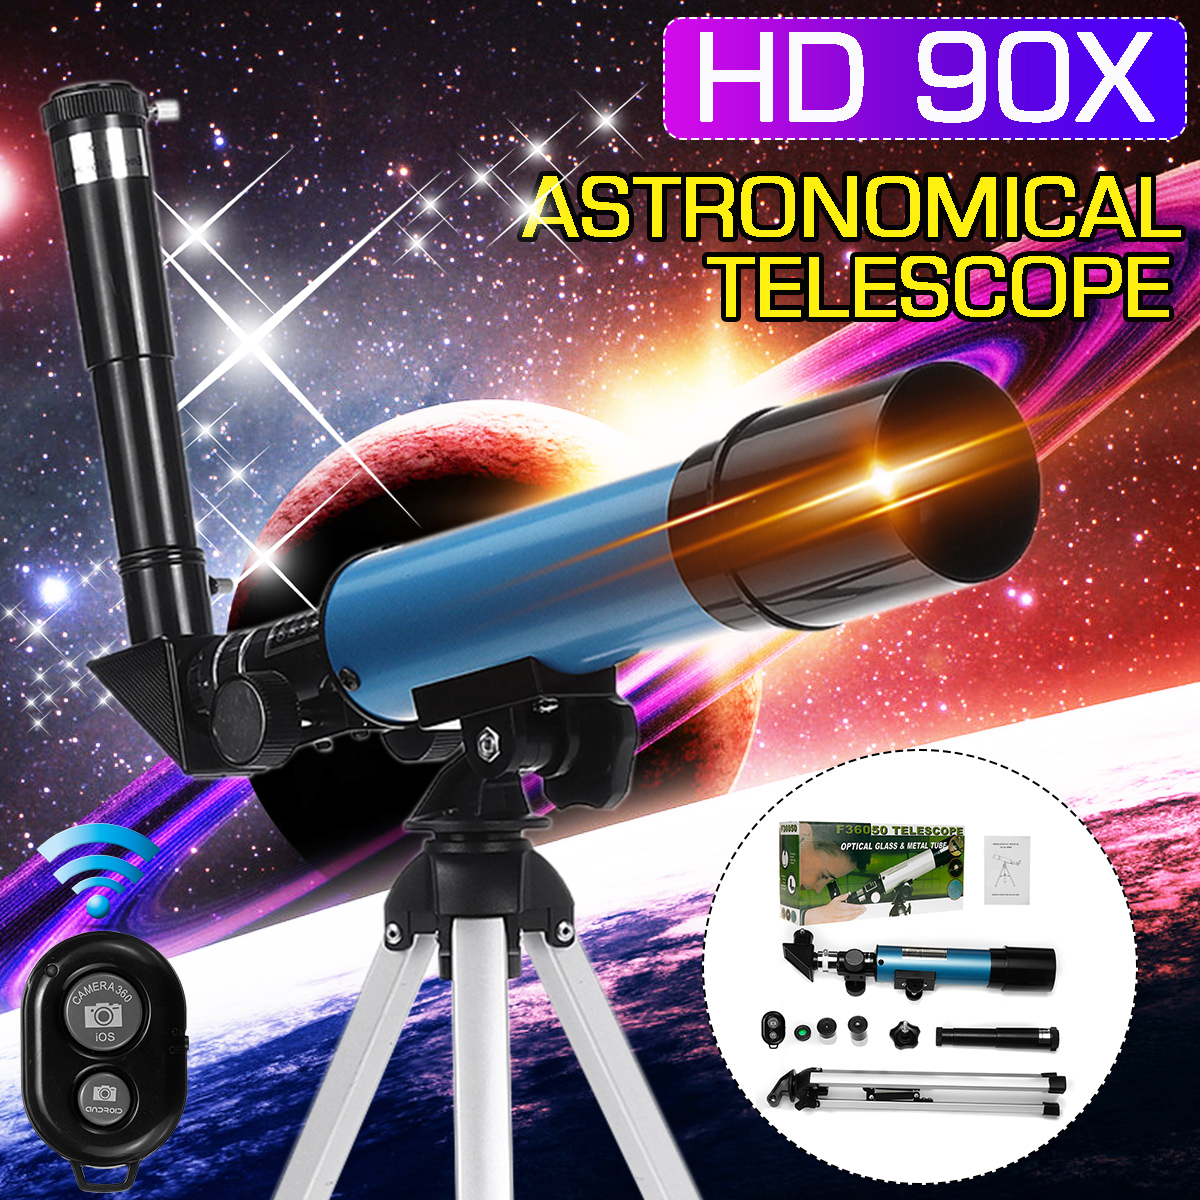 90x-Magnification-Astronomical-Telescope-Clear-Image-with-Remote-Control-and-Camera-Rod-for-Observe--1851121-1